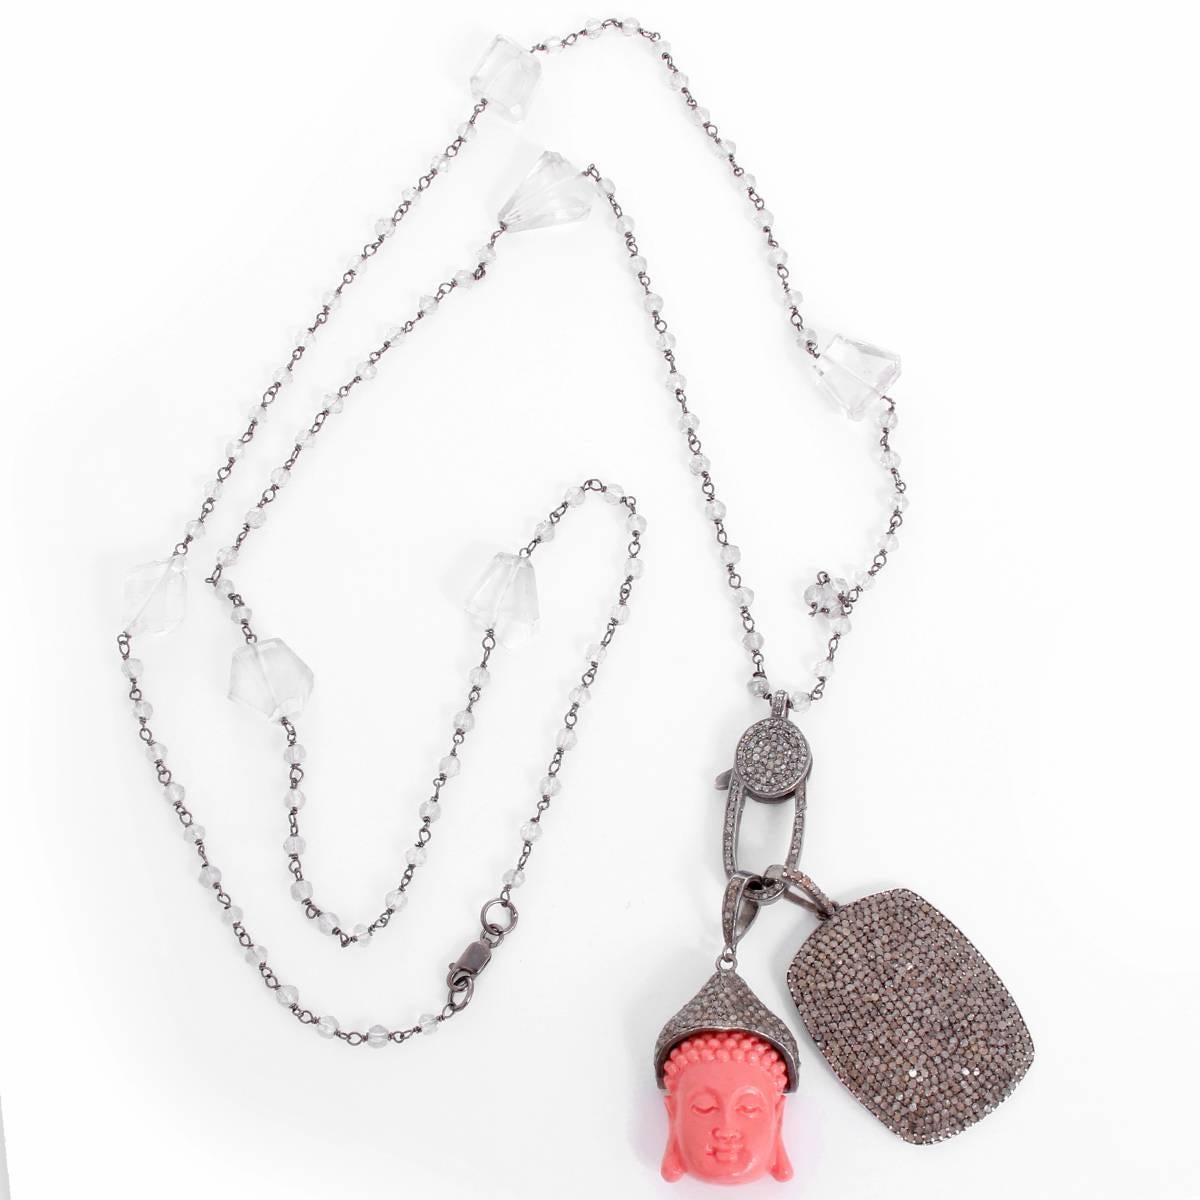 Clear Quartz, Diamond, Coral Buddha and Dog Tag Pendant Necklace - . This necklace features a coral Buddha, dog tag pendant, and clasp; all with diamonds set in silver on a clear quartz chain. Pendants measure apx. 3-1/4 inches in length at the